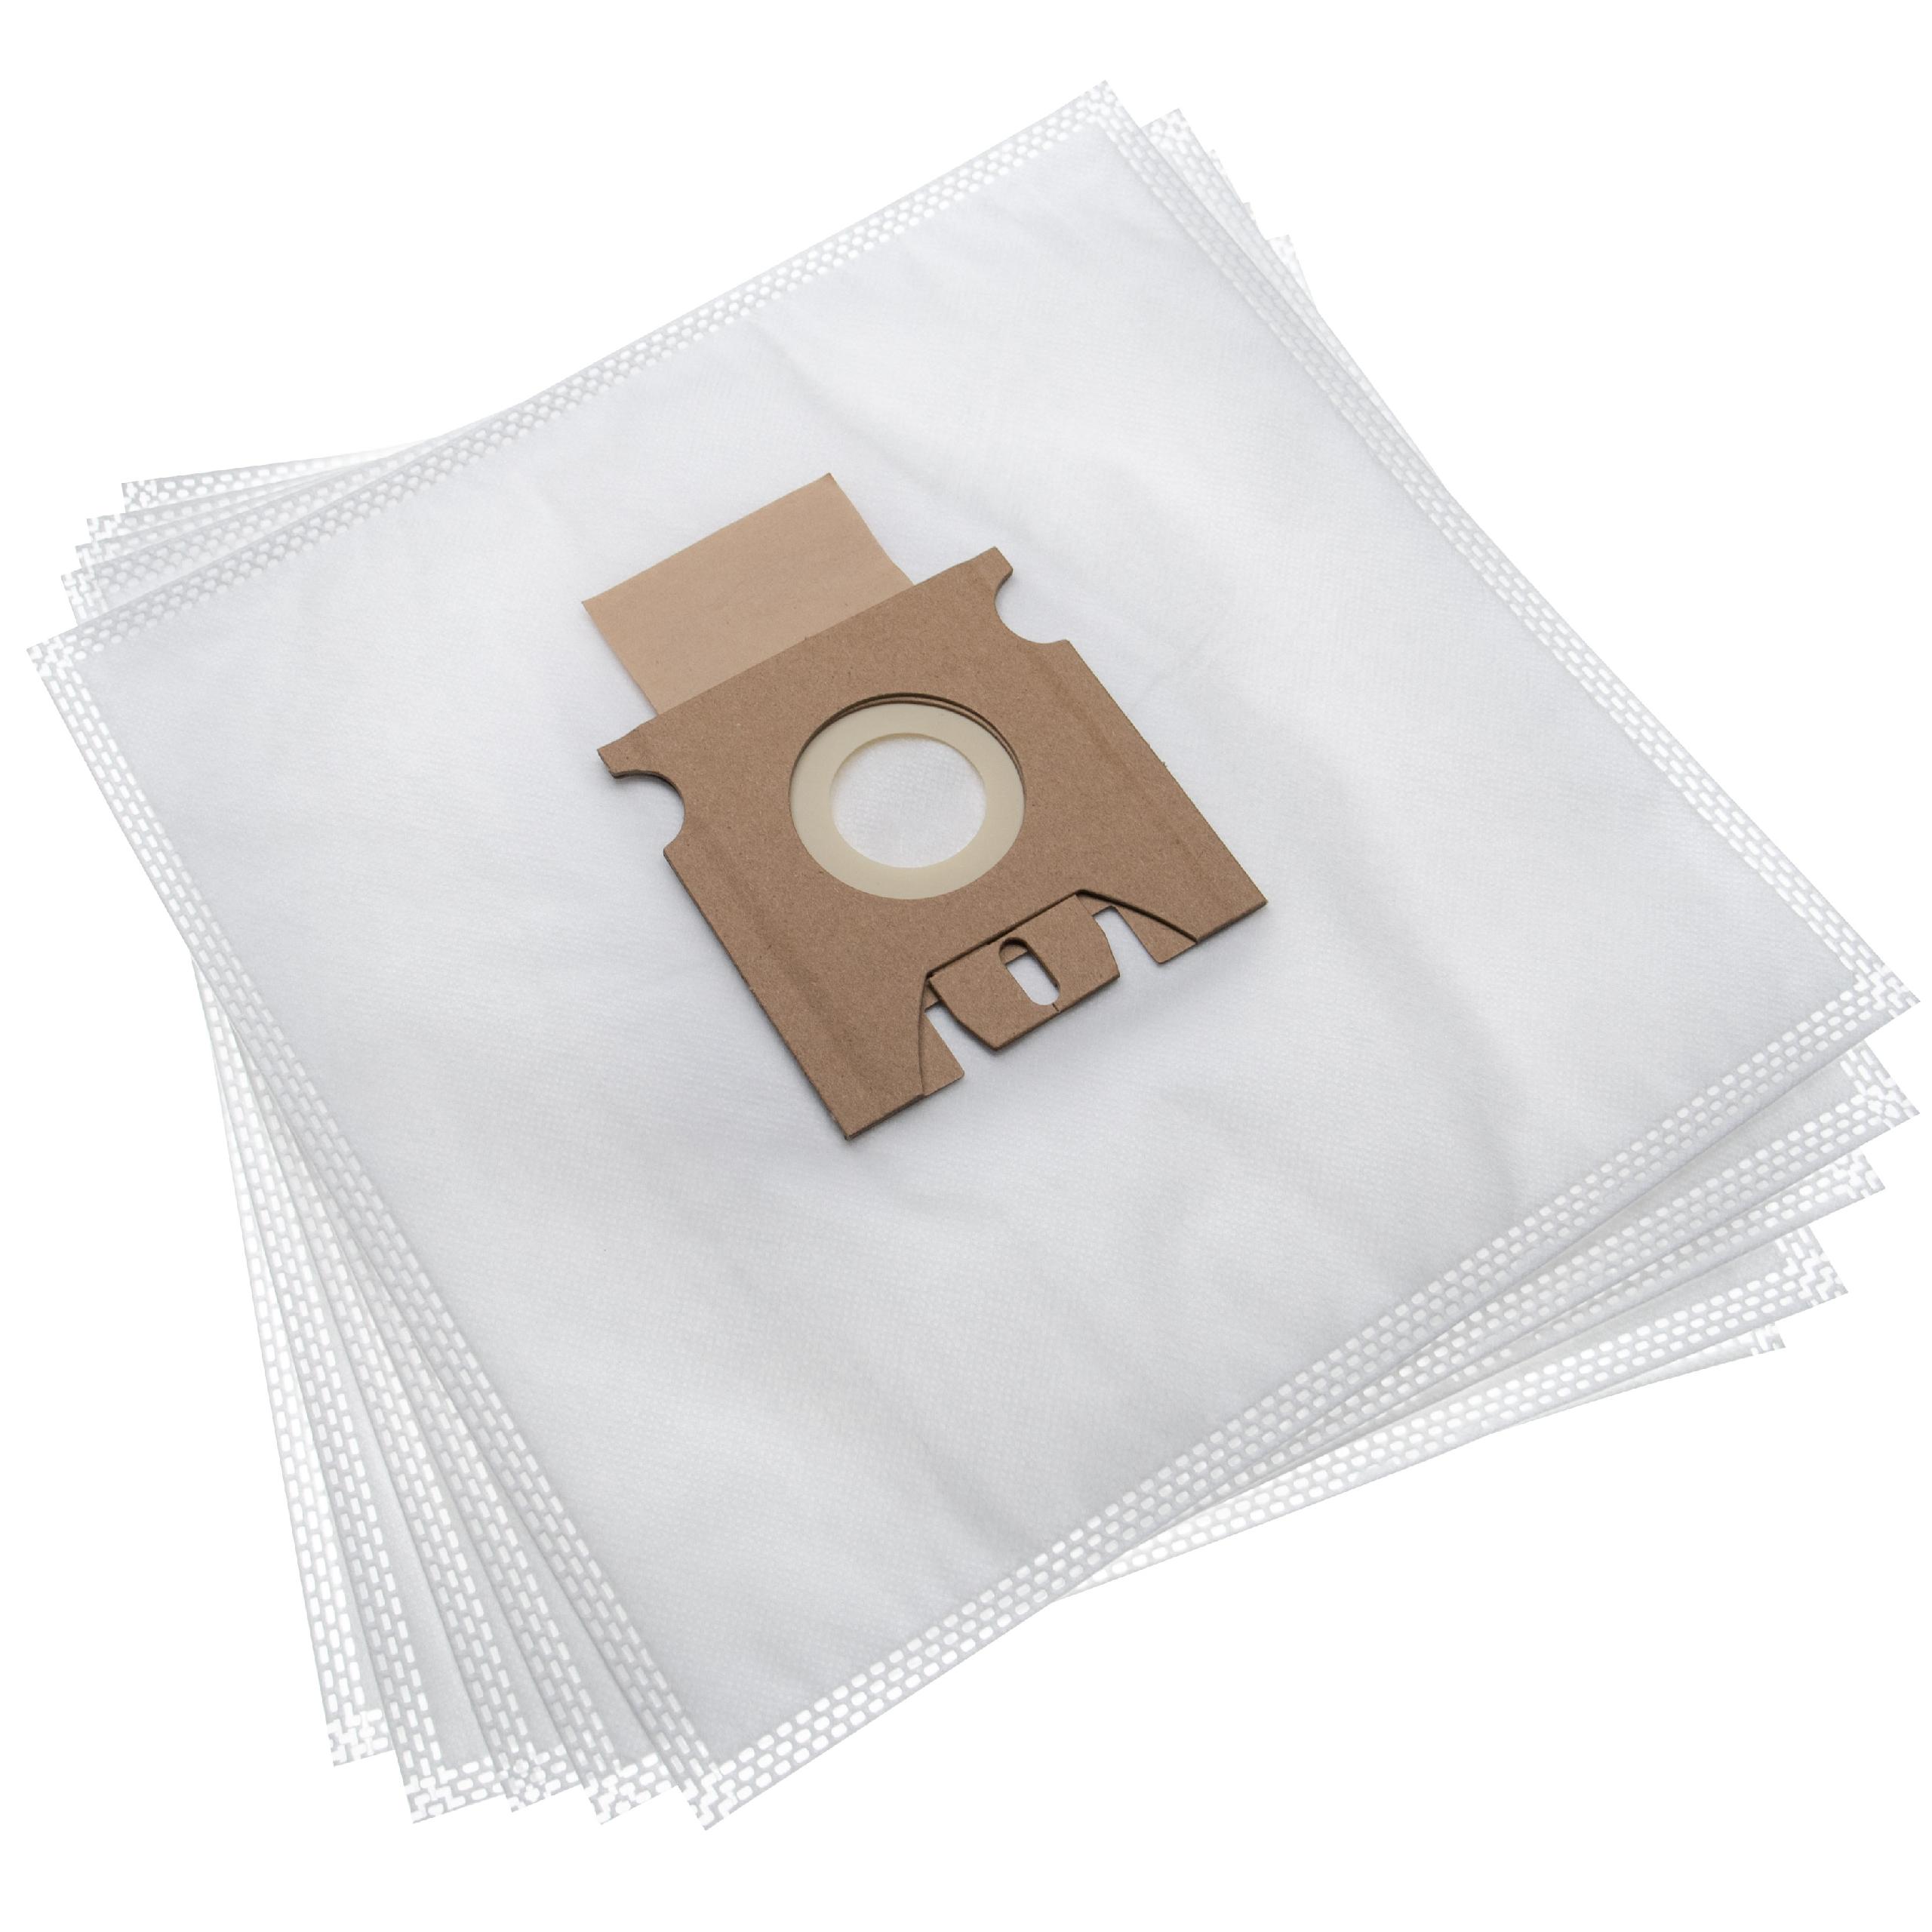 5x Vacuum Cleaner Bag replaces Hoover 35601734, H77 for Hoover - microfleece